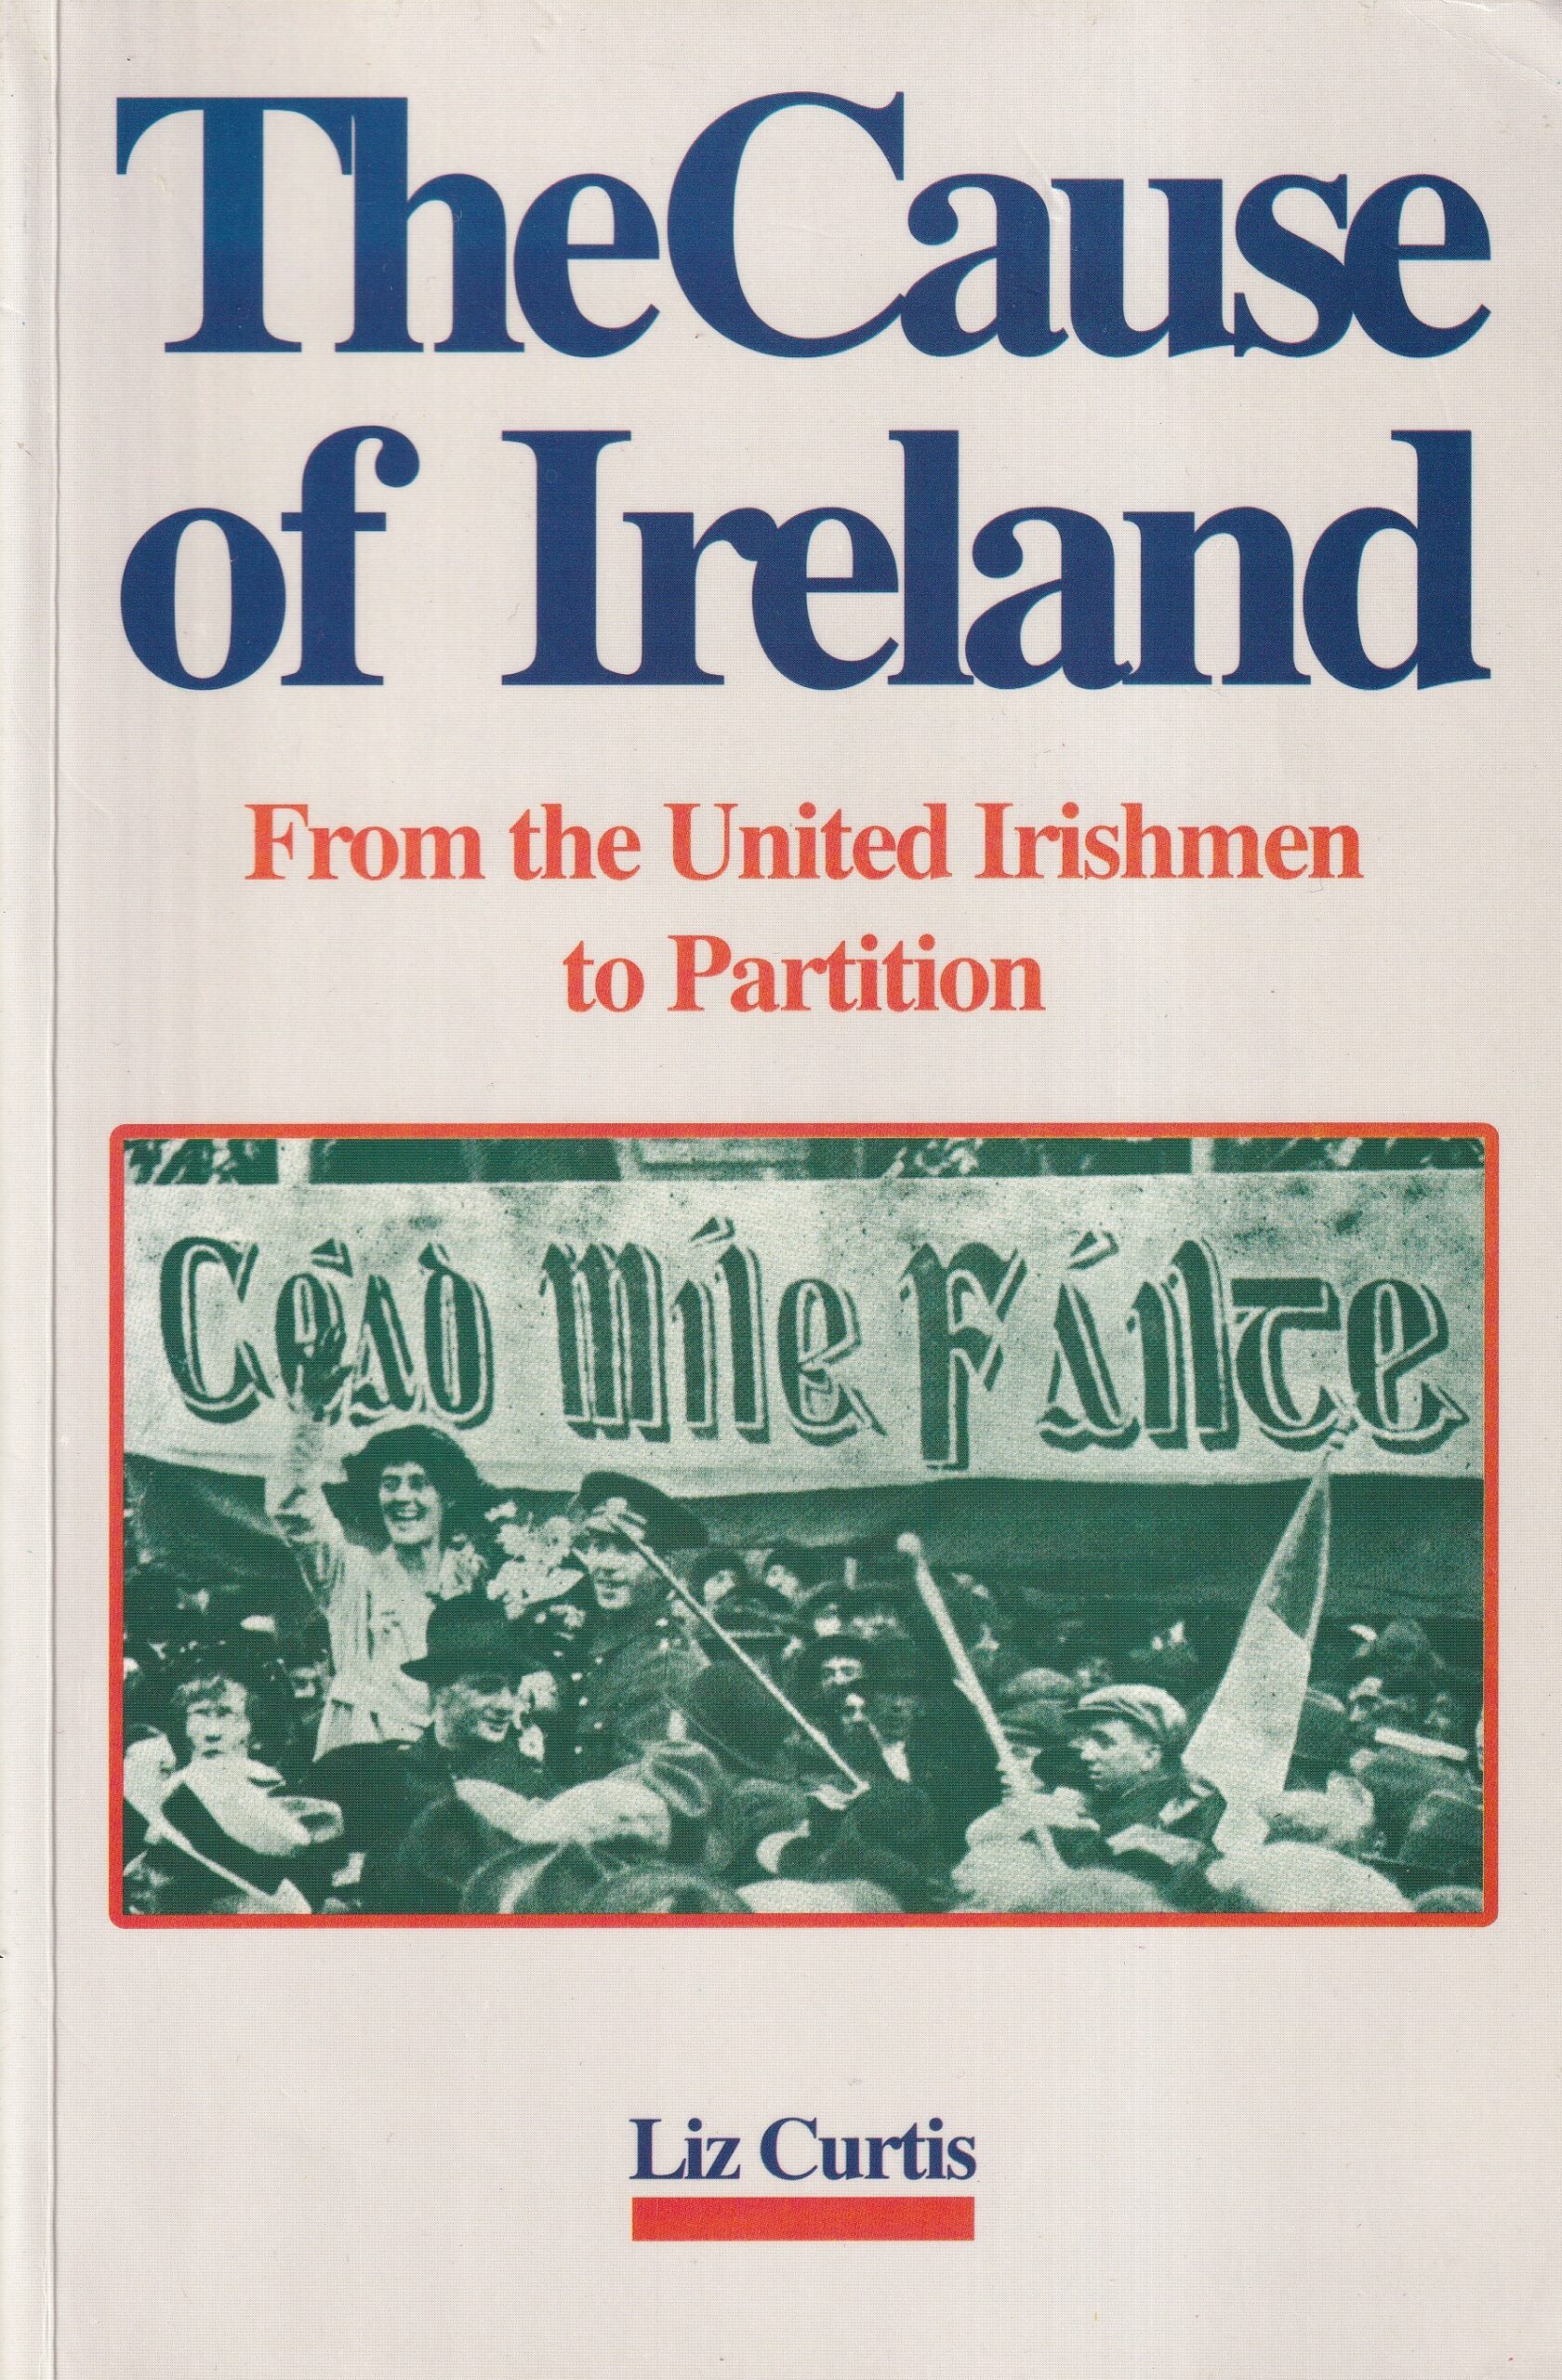 The Cause of Ireland: From the United Irishmen to Partition by Liz Curtis